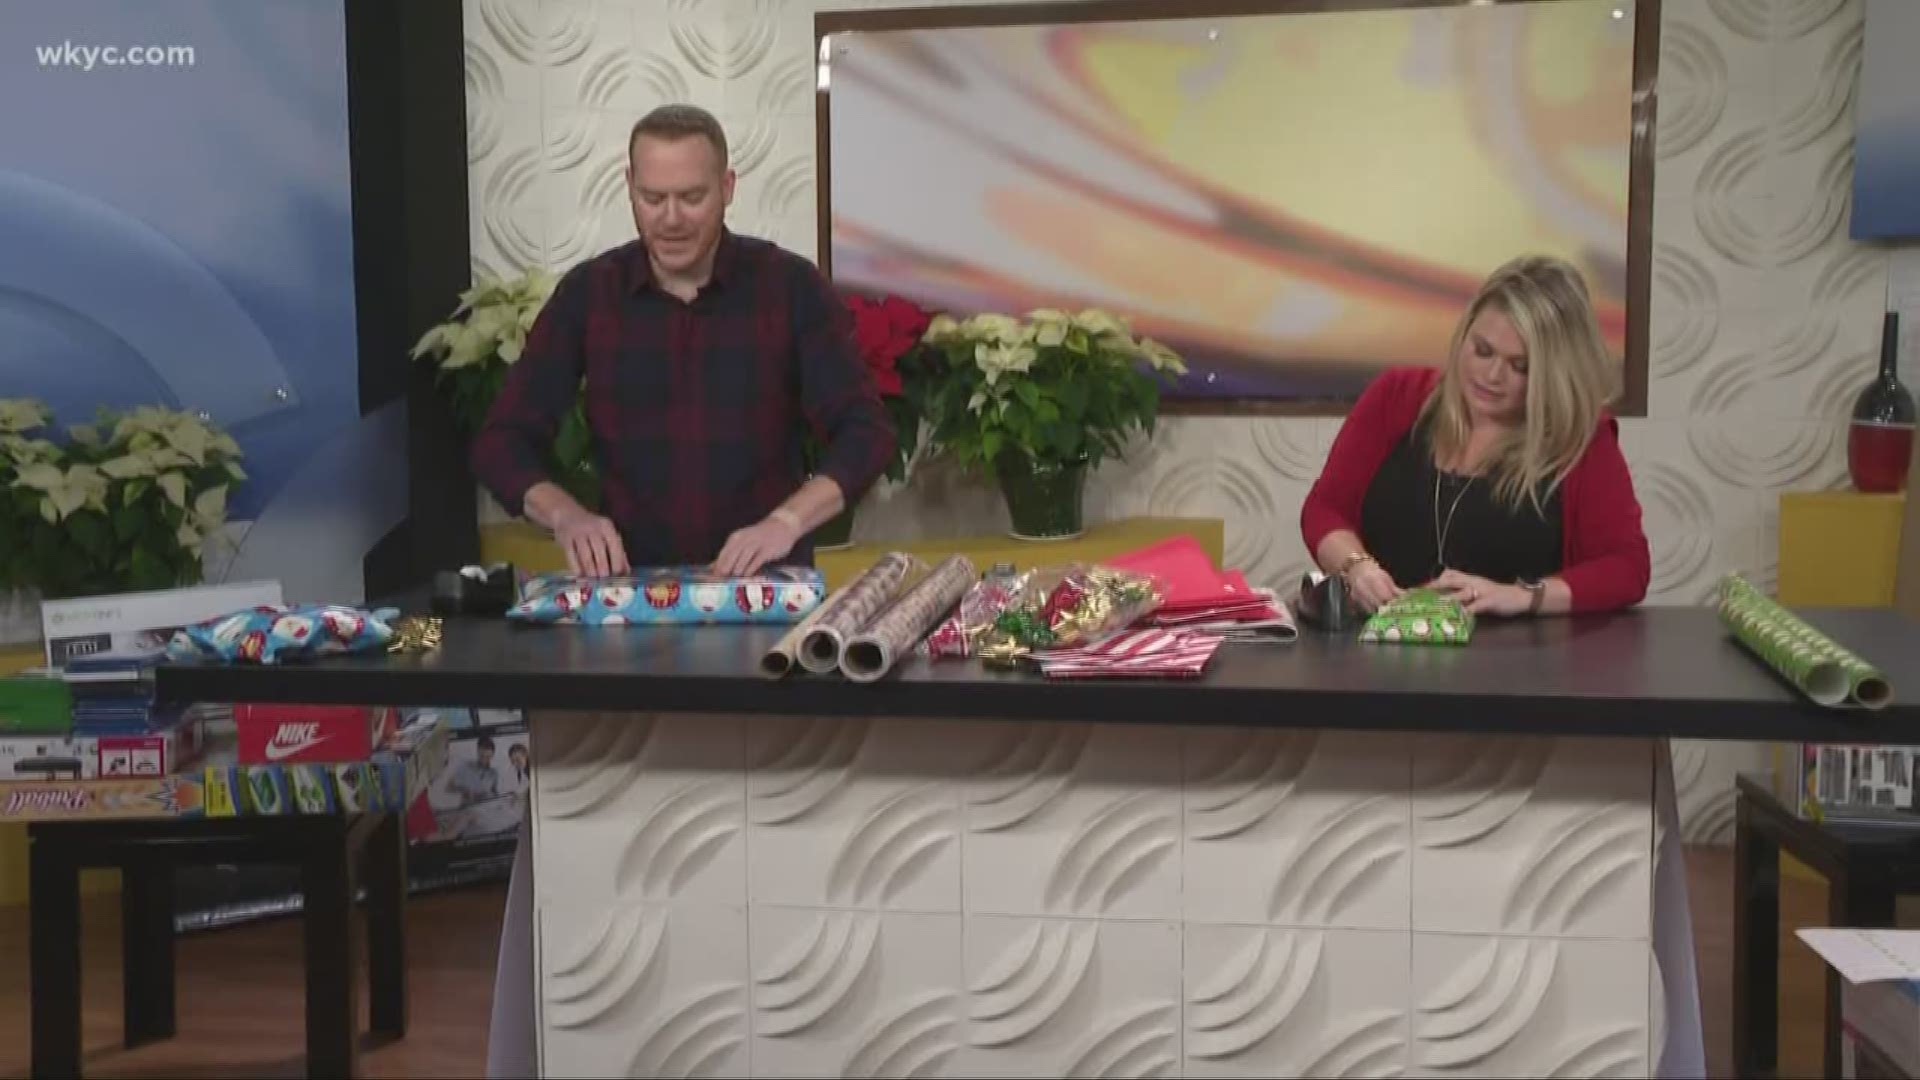 We've teamed up with Fostering Hope to help provide presents for children at the Ohio Guidestone. But first, we had to wrap them! Mike and Lindsay went head-to-head!